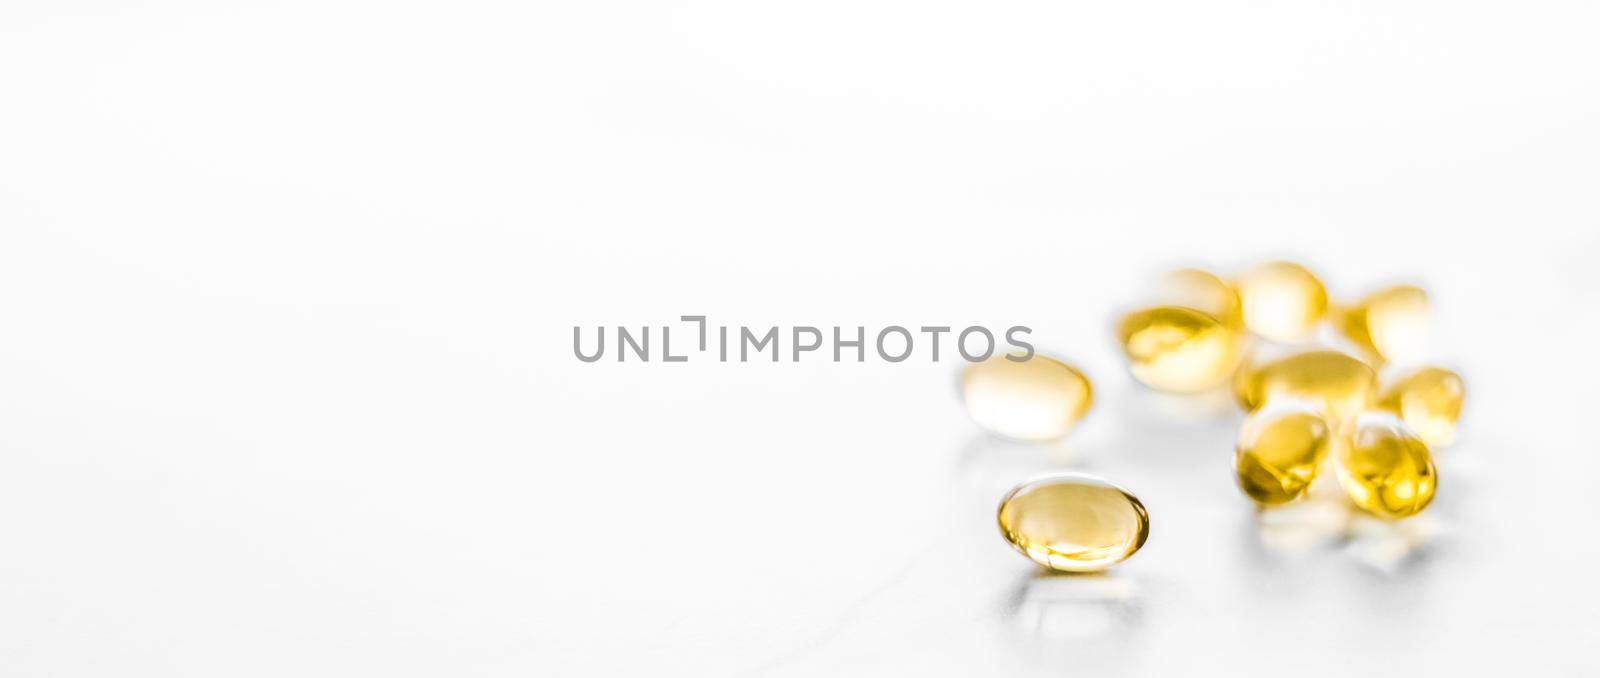 Pharmaceutical, branding and science concept - Vitamin D and golden Omega 3 pills for healthy diet nutrition, fish oil food supplement pill capsules, healthcare and medicine as pharmacy background